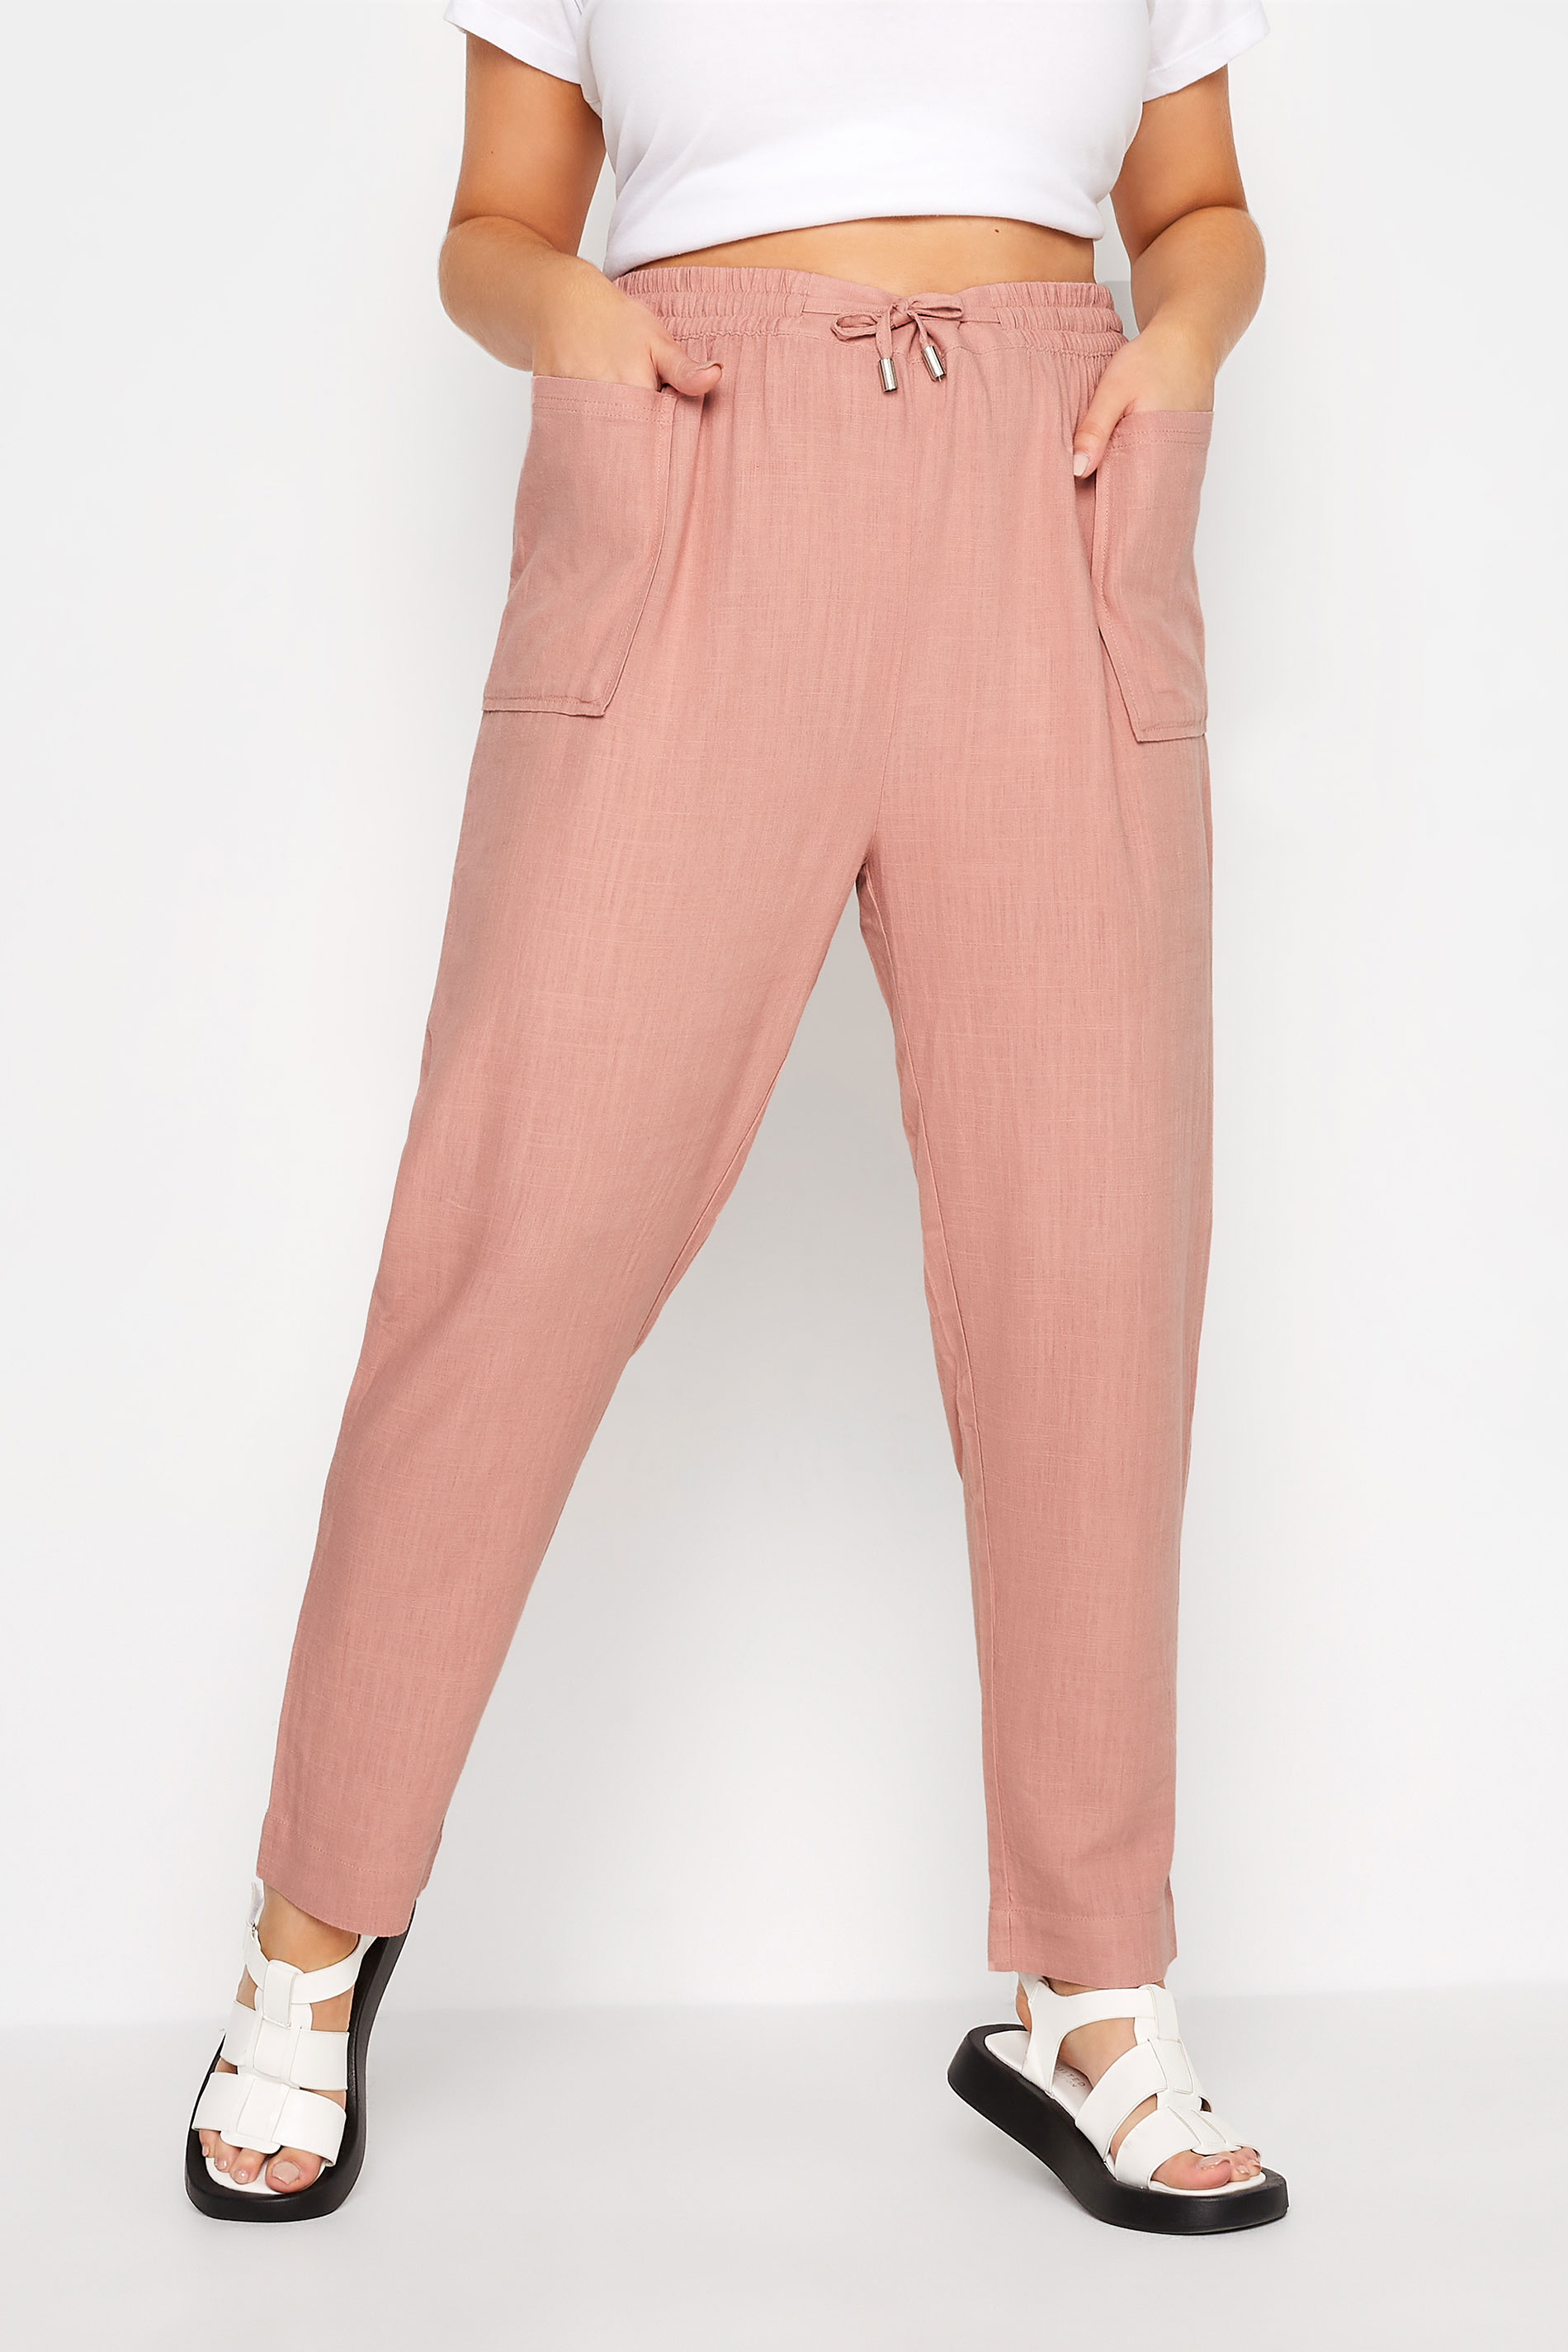 Plus Size Rose Pink Linen Look Joggers | Yours Clothing  1